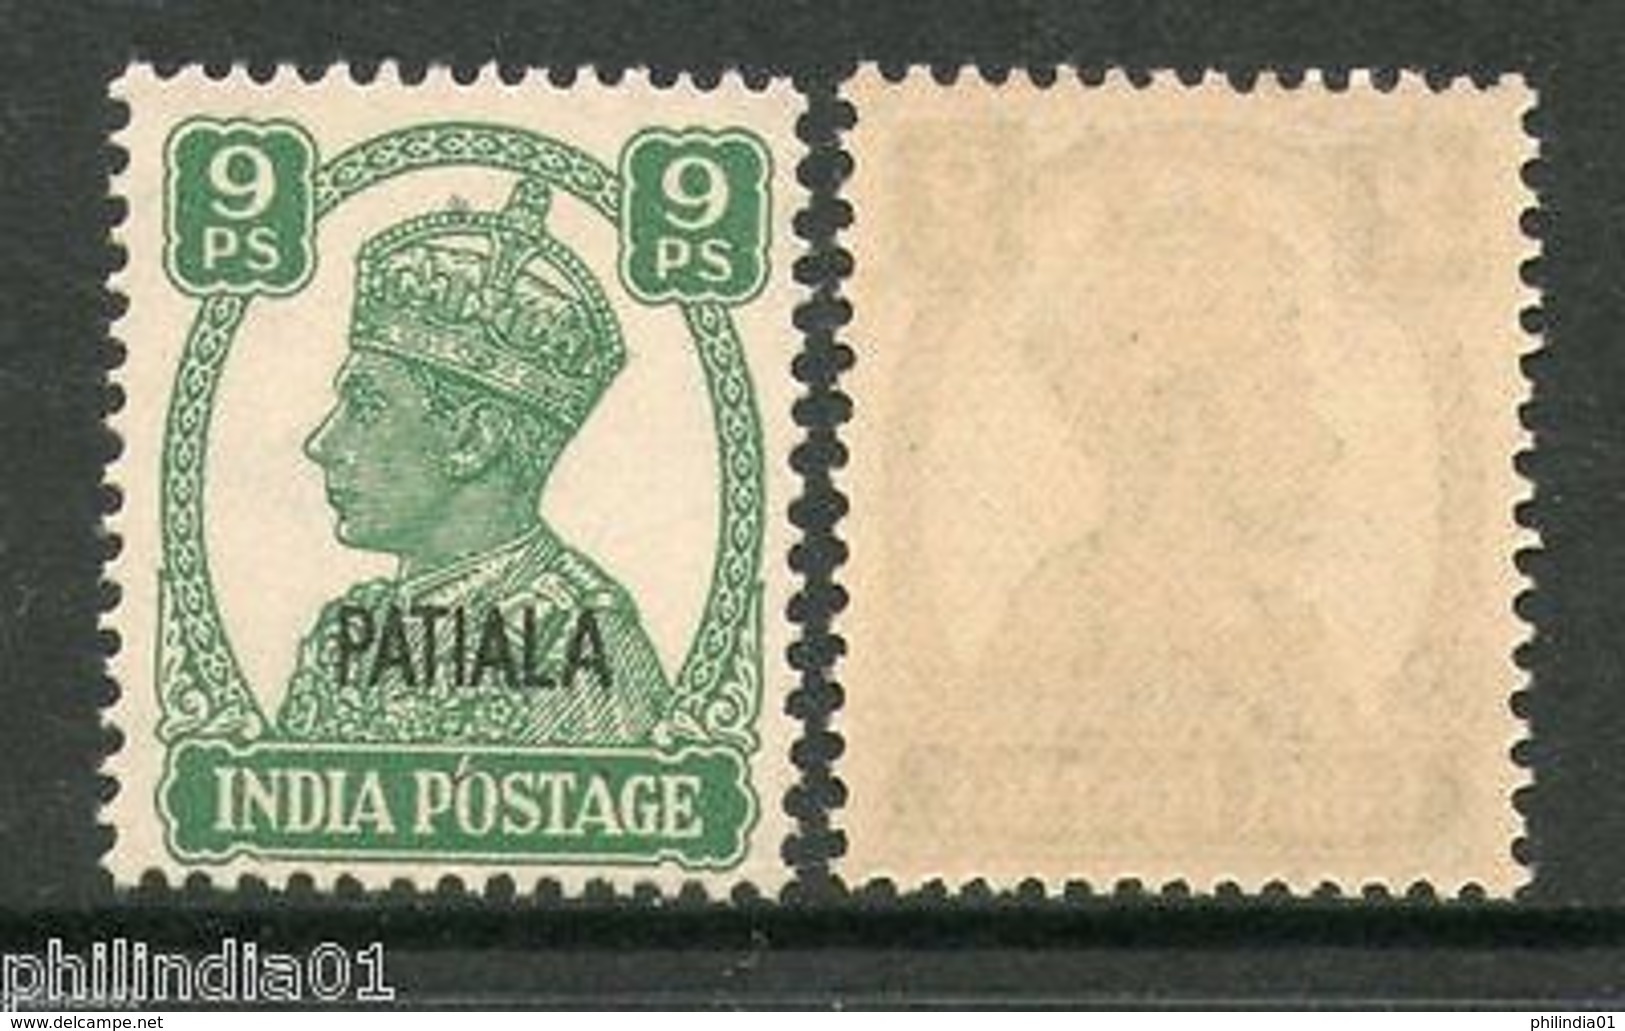 India PATIALA State 9ps KG VI Postage SG105 Cat �2 MNH - Patiala